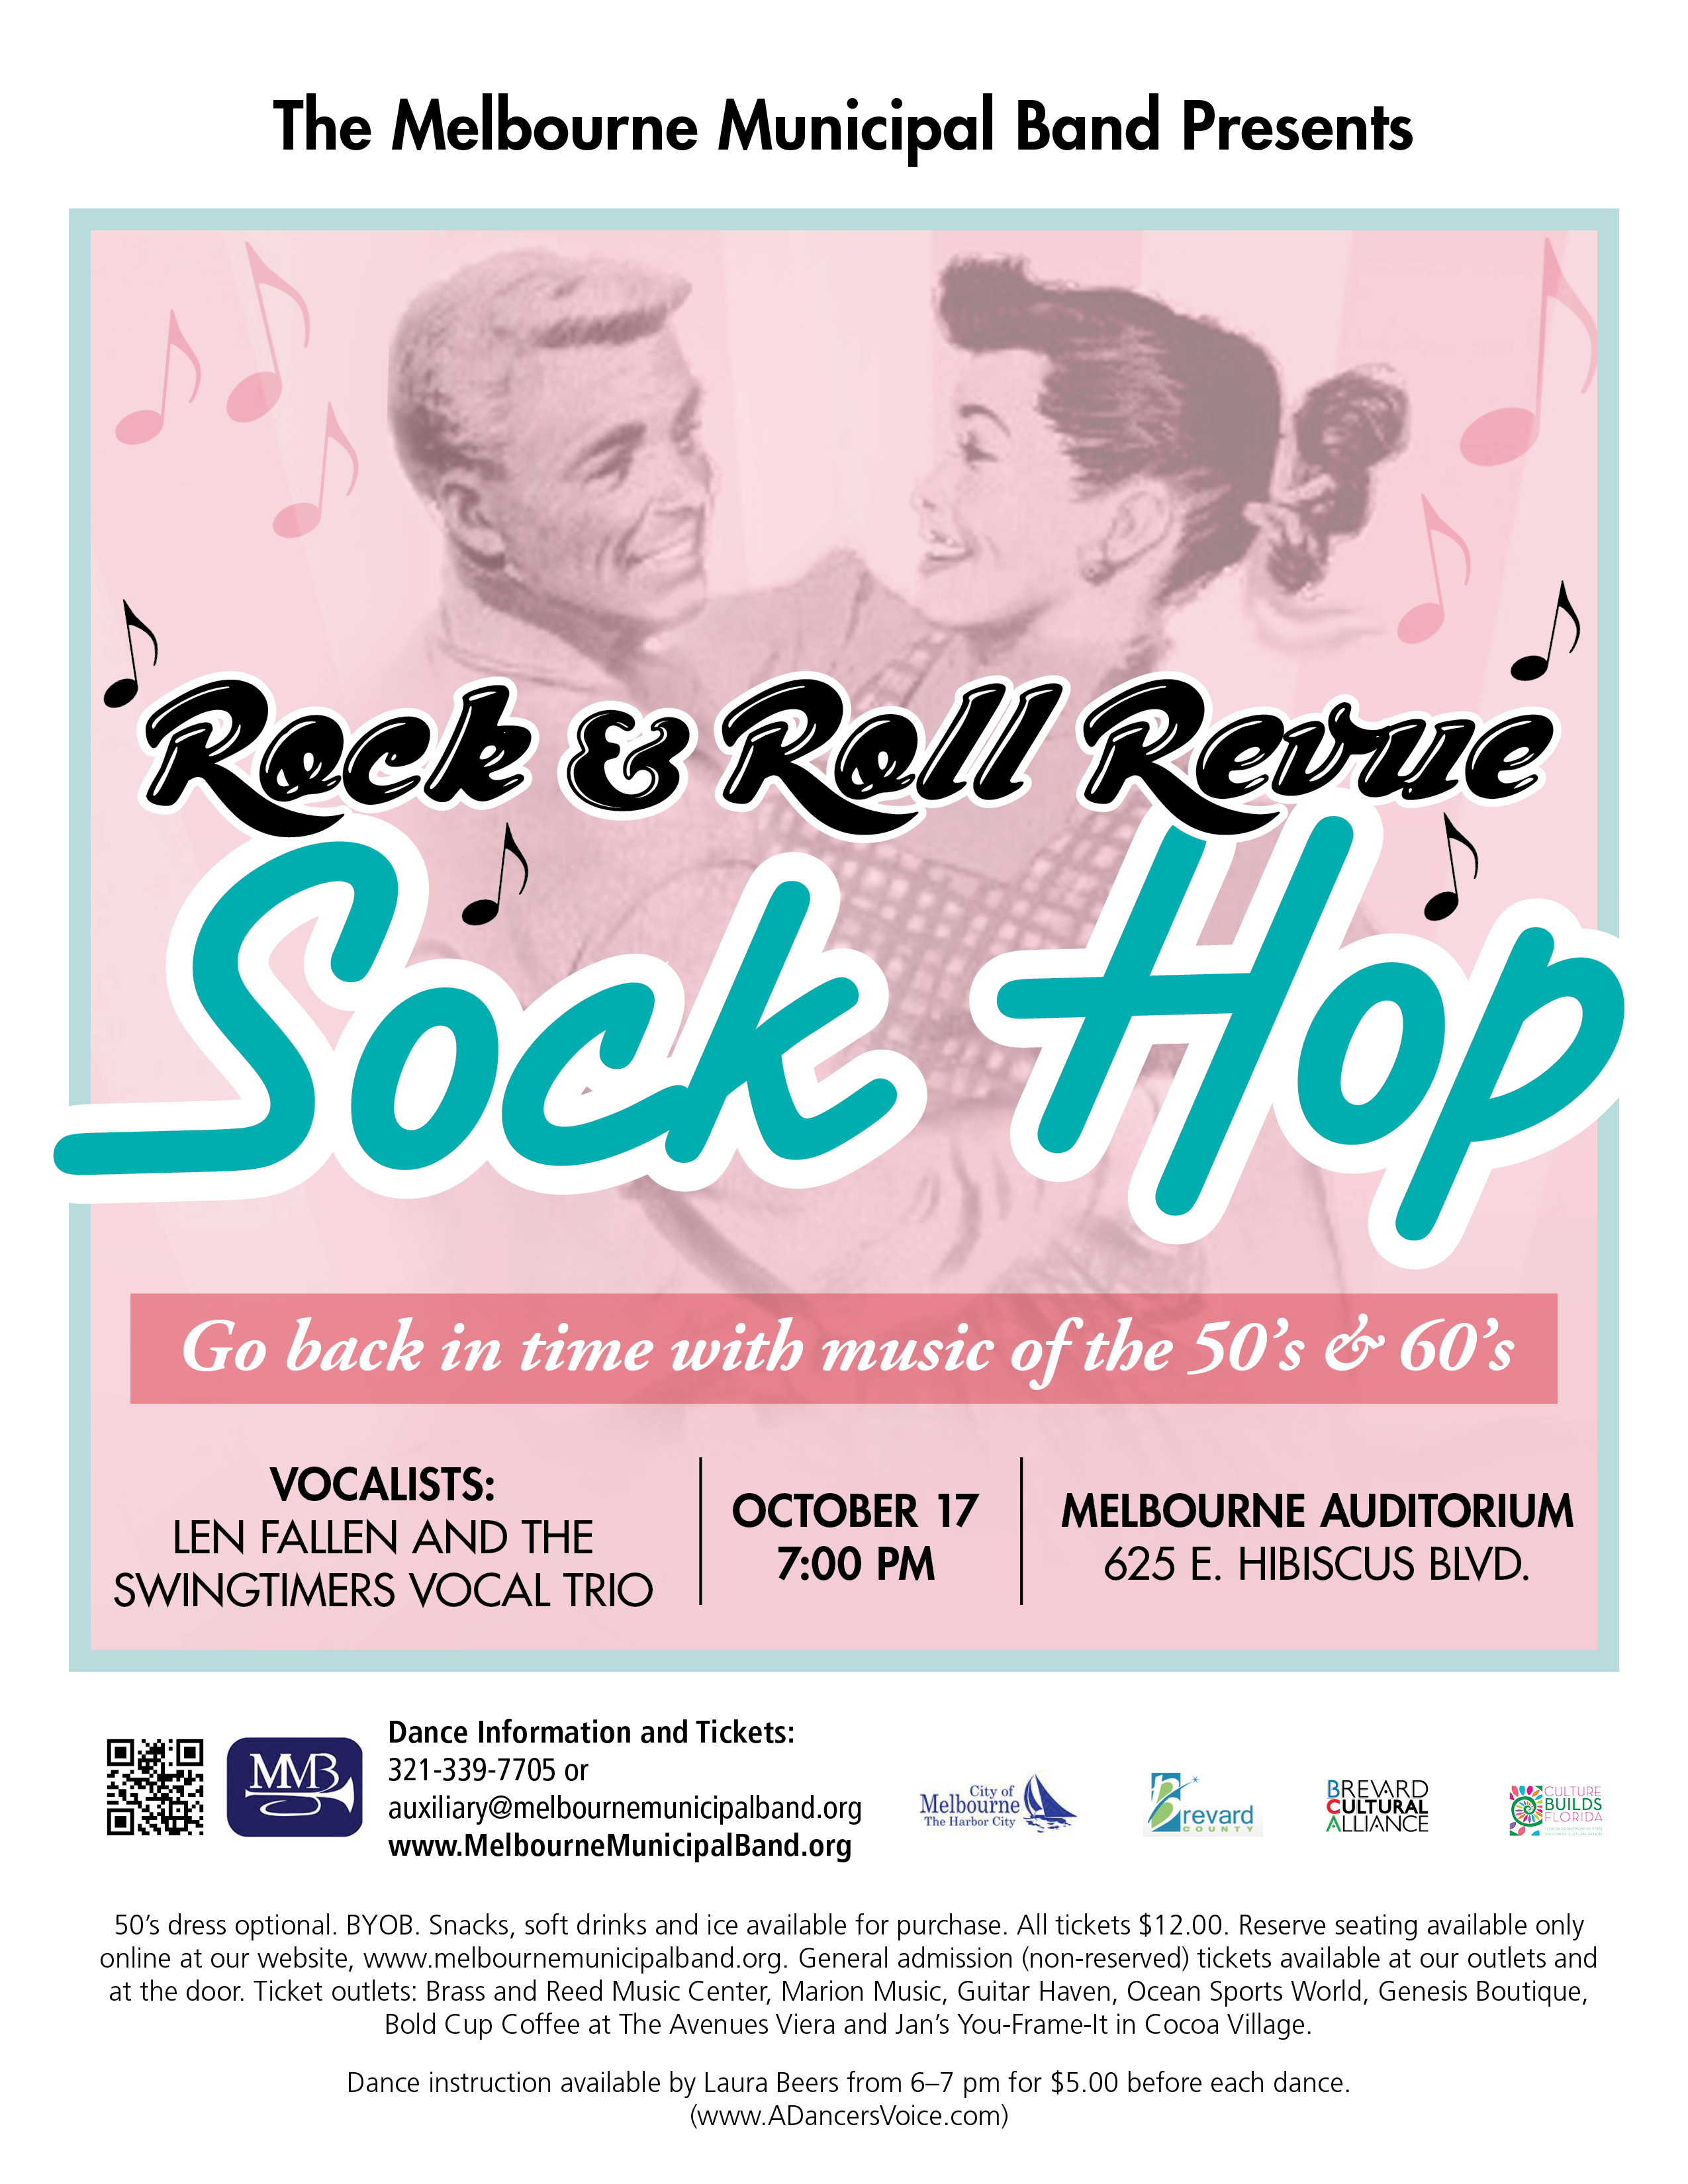 Sock Hop presented by The Melbourne Municipal Band